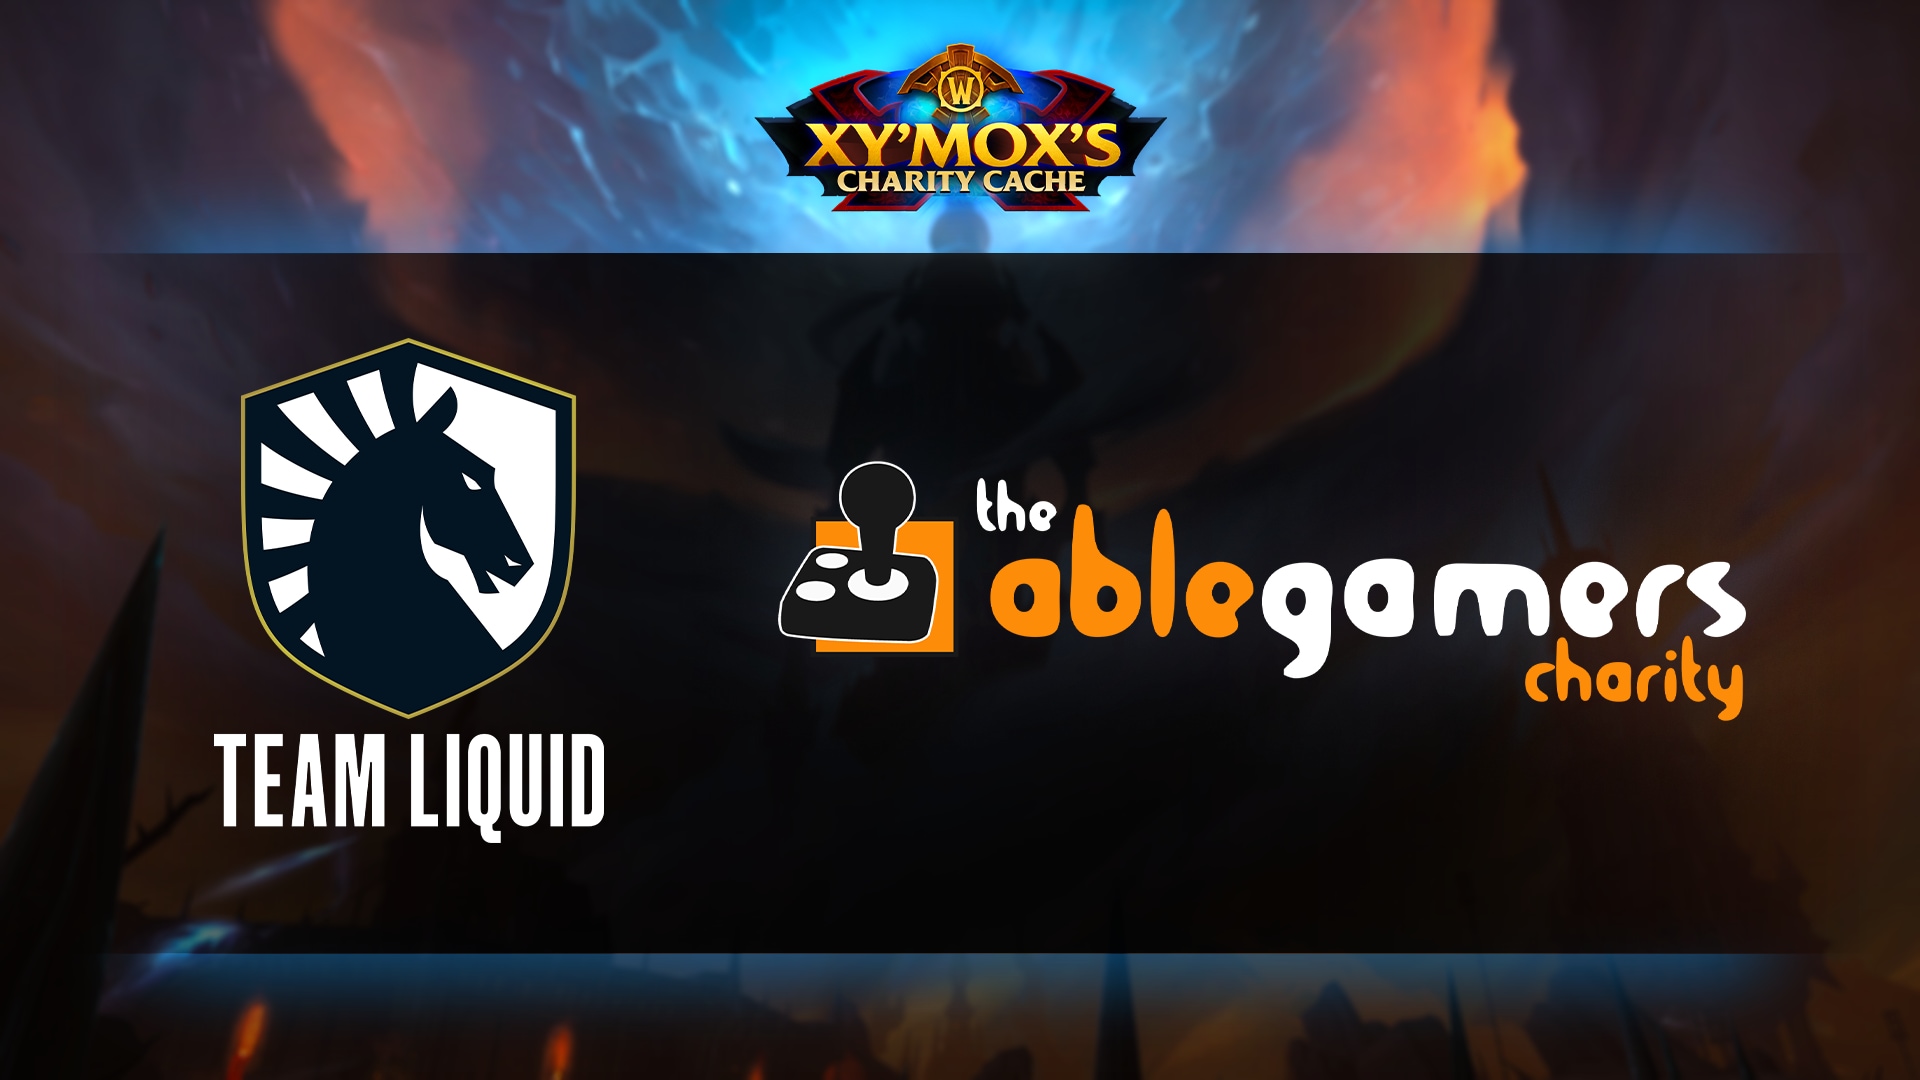 Team Liquid Logo and The Able Gamers Charity Logo